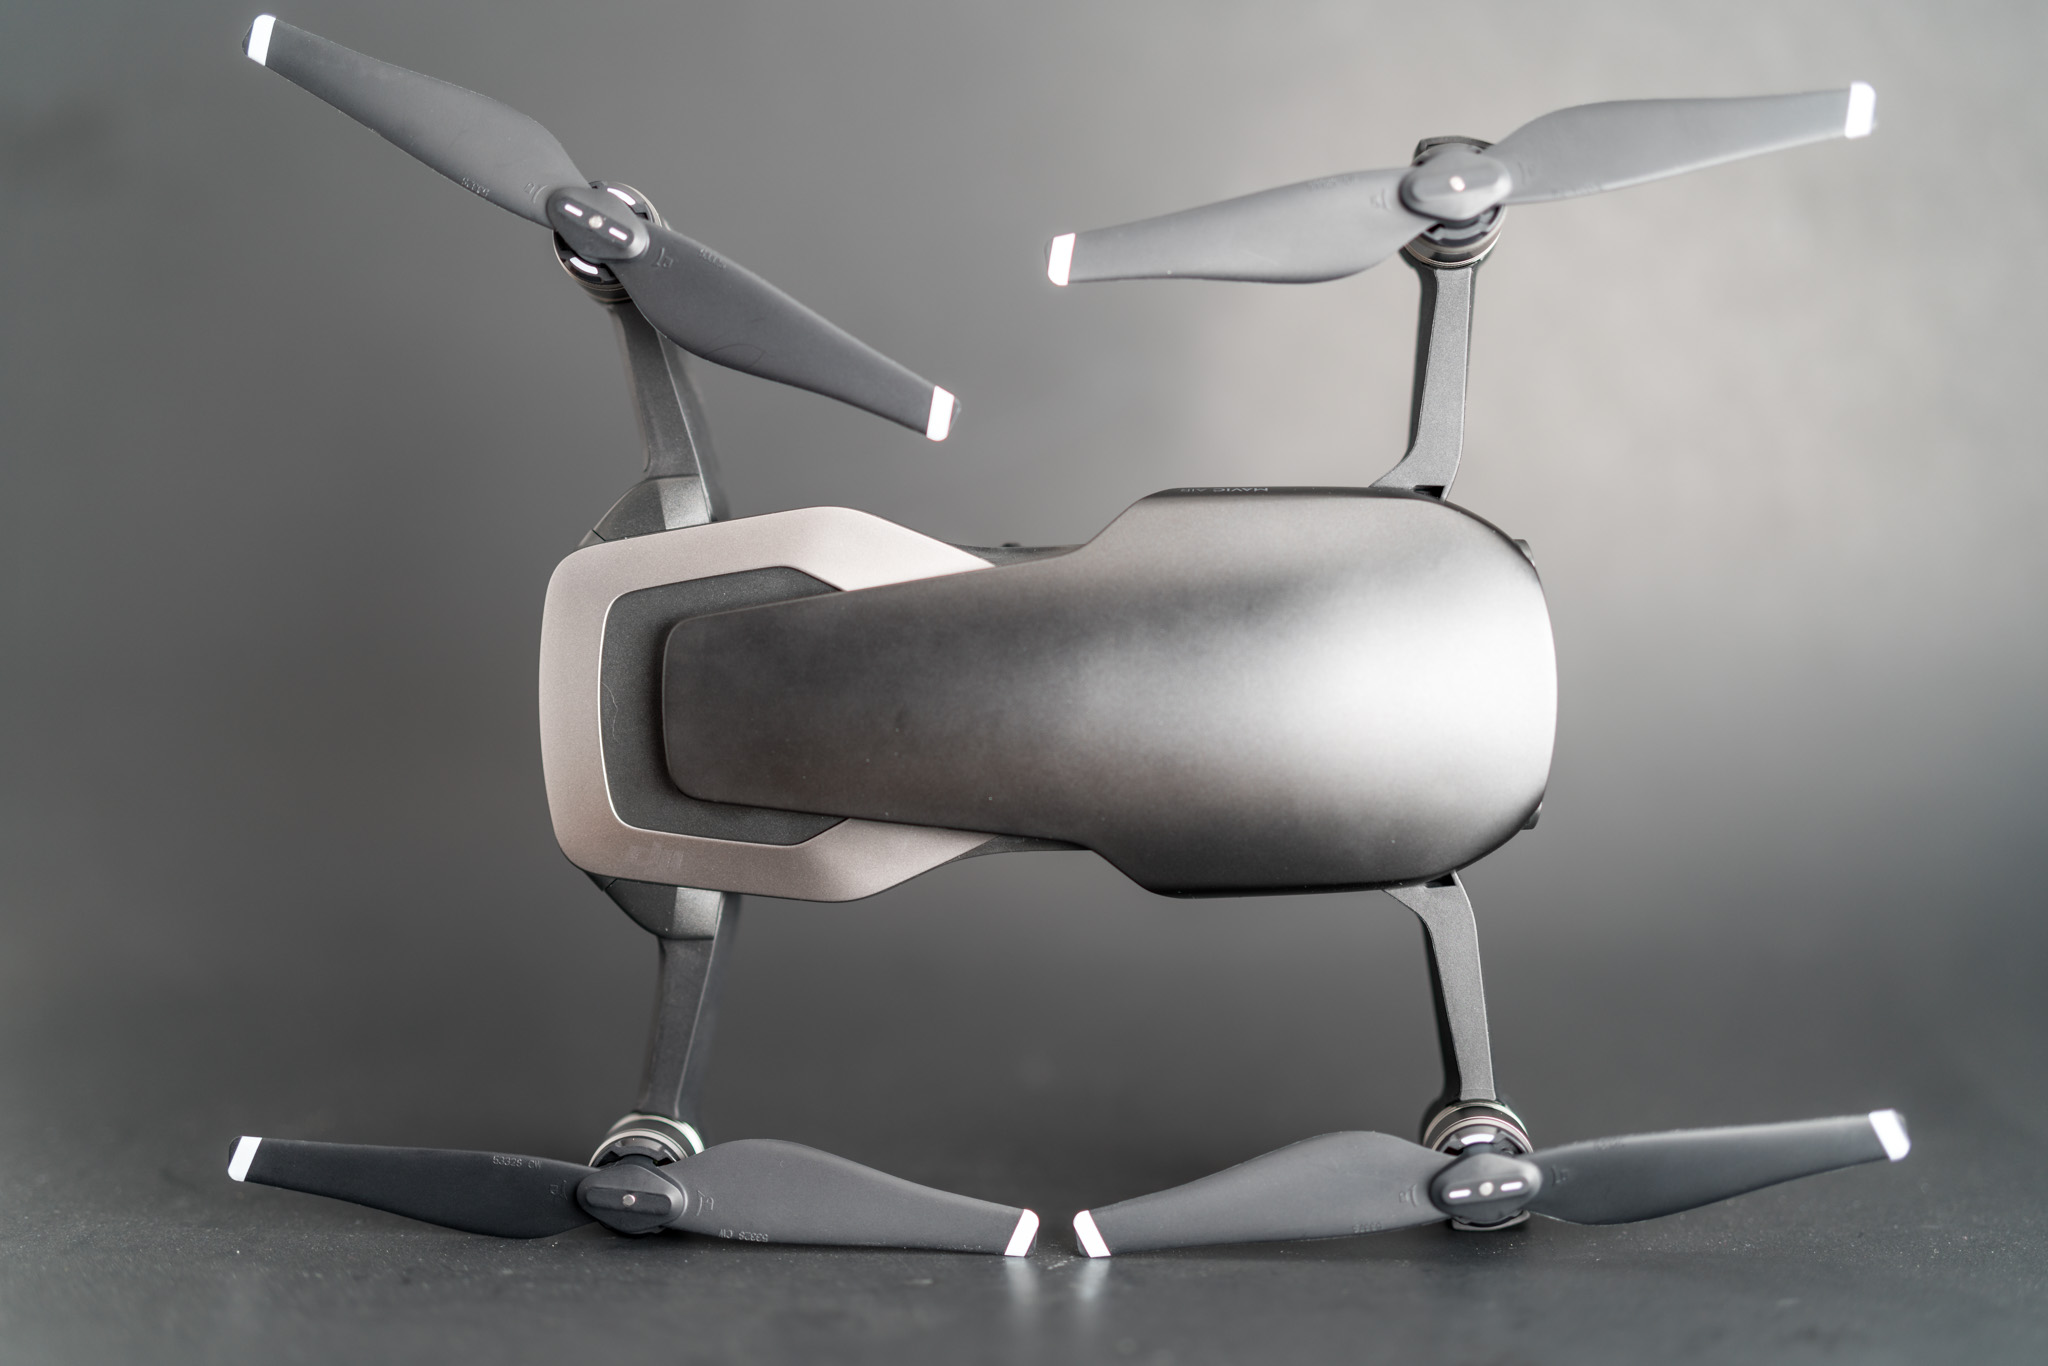 a small drone with propellers